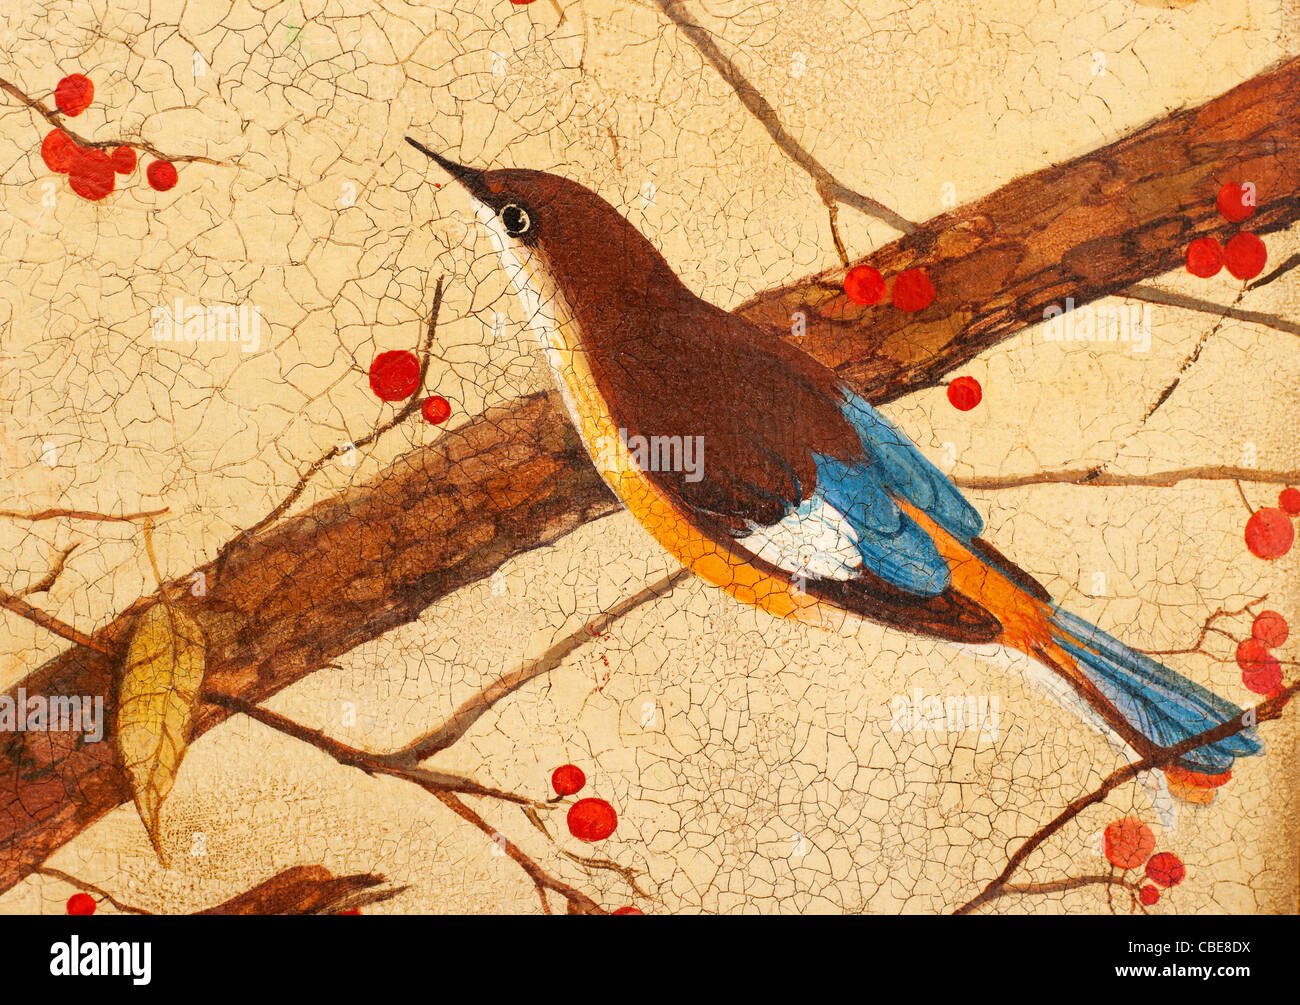 Painting. Colorful bird on branches with red berries Stock Photo